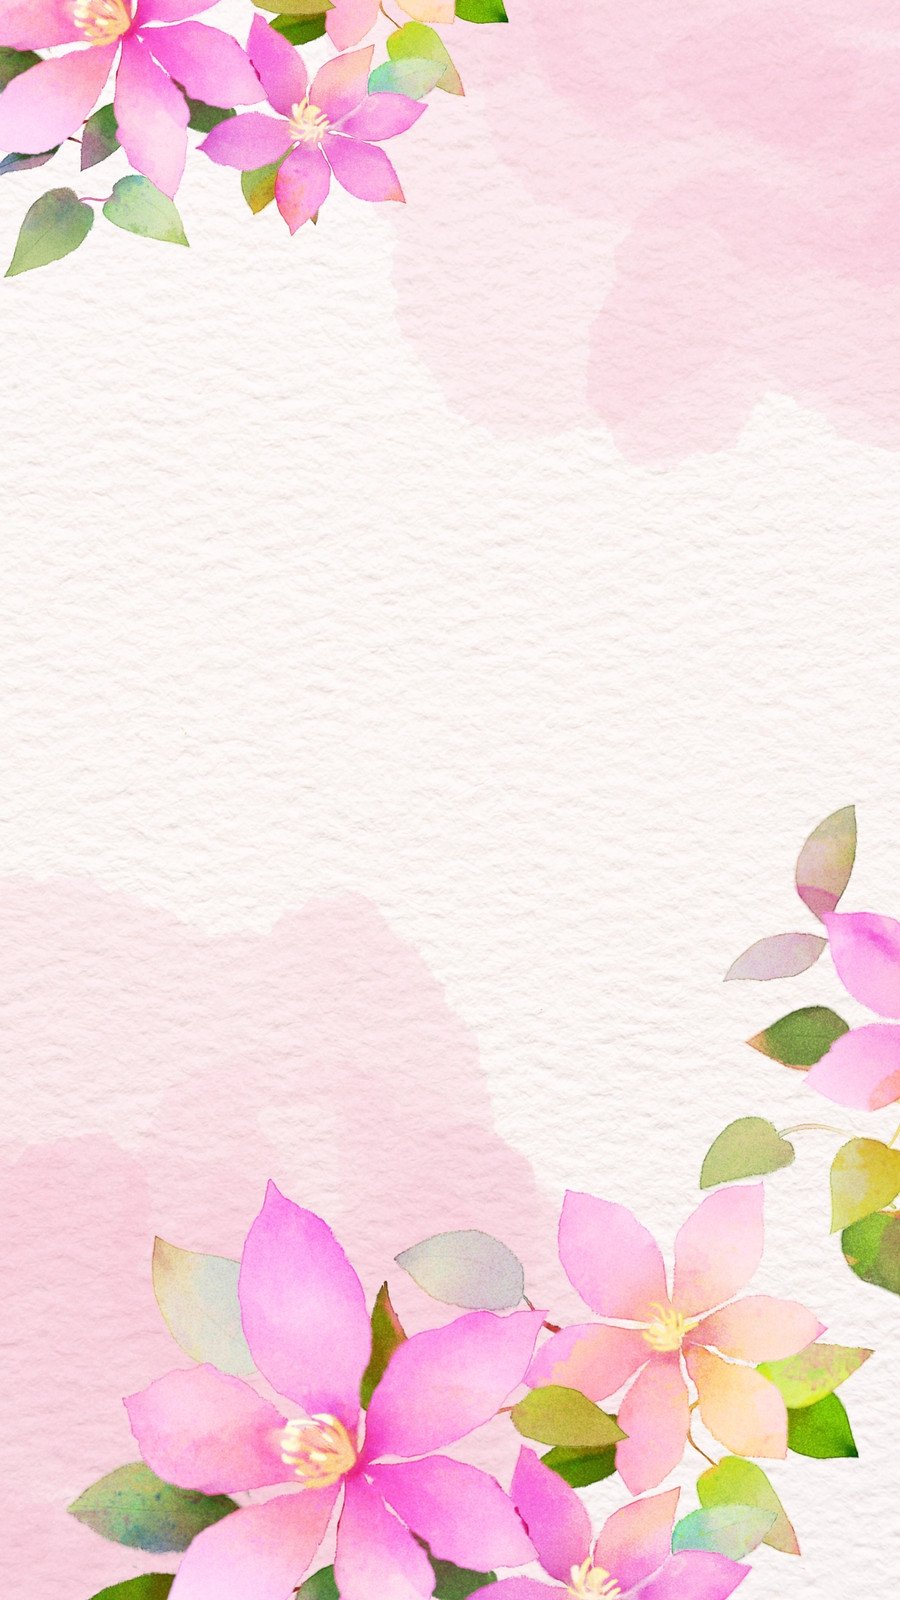 Spring Floral Background Texture and Wallpaper Flatlay of White Almond  Blossom Flowers Over Light Pink Background Stock Image  Image of feminine  design 145191837